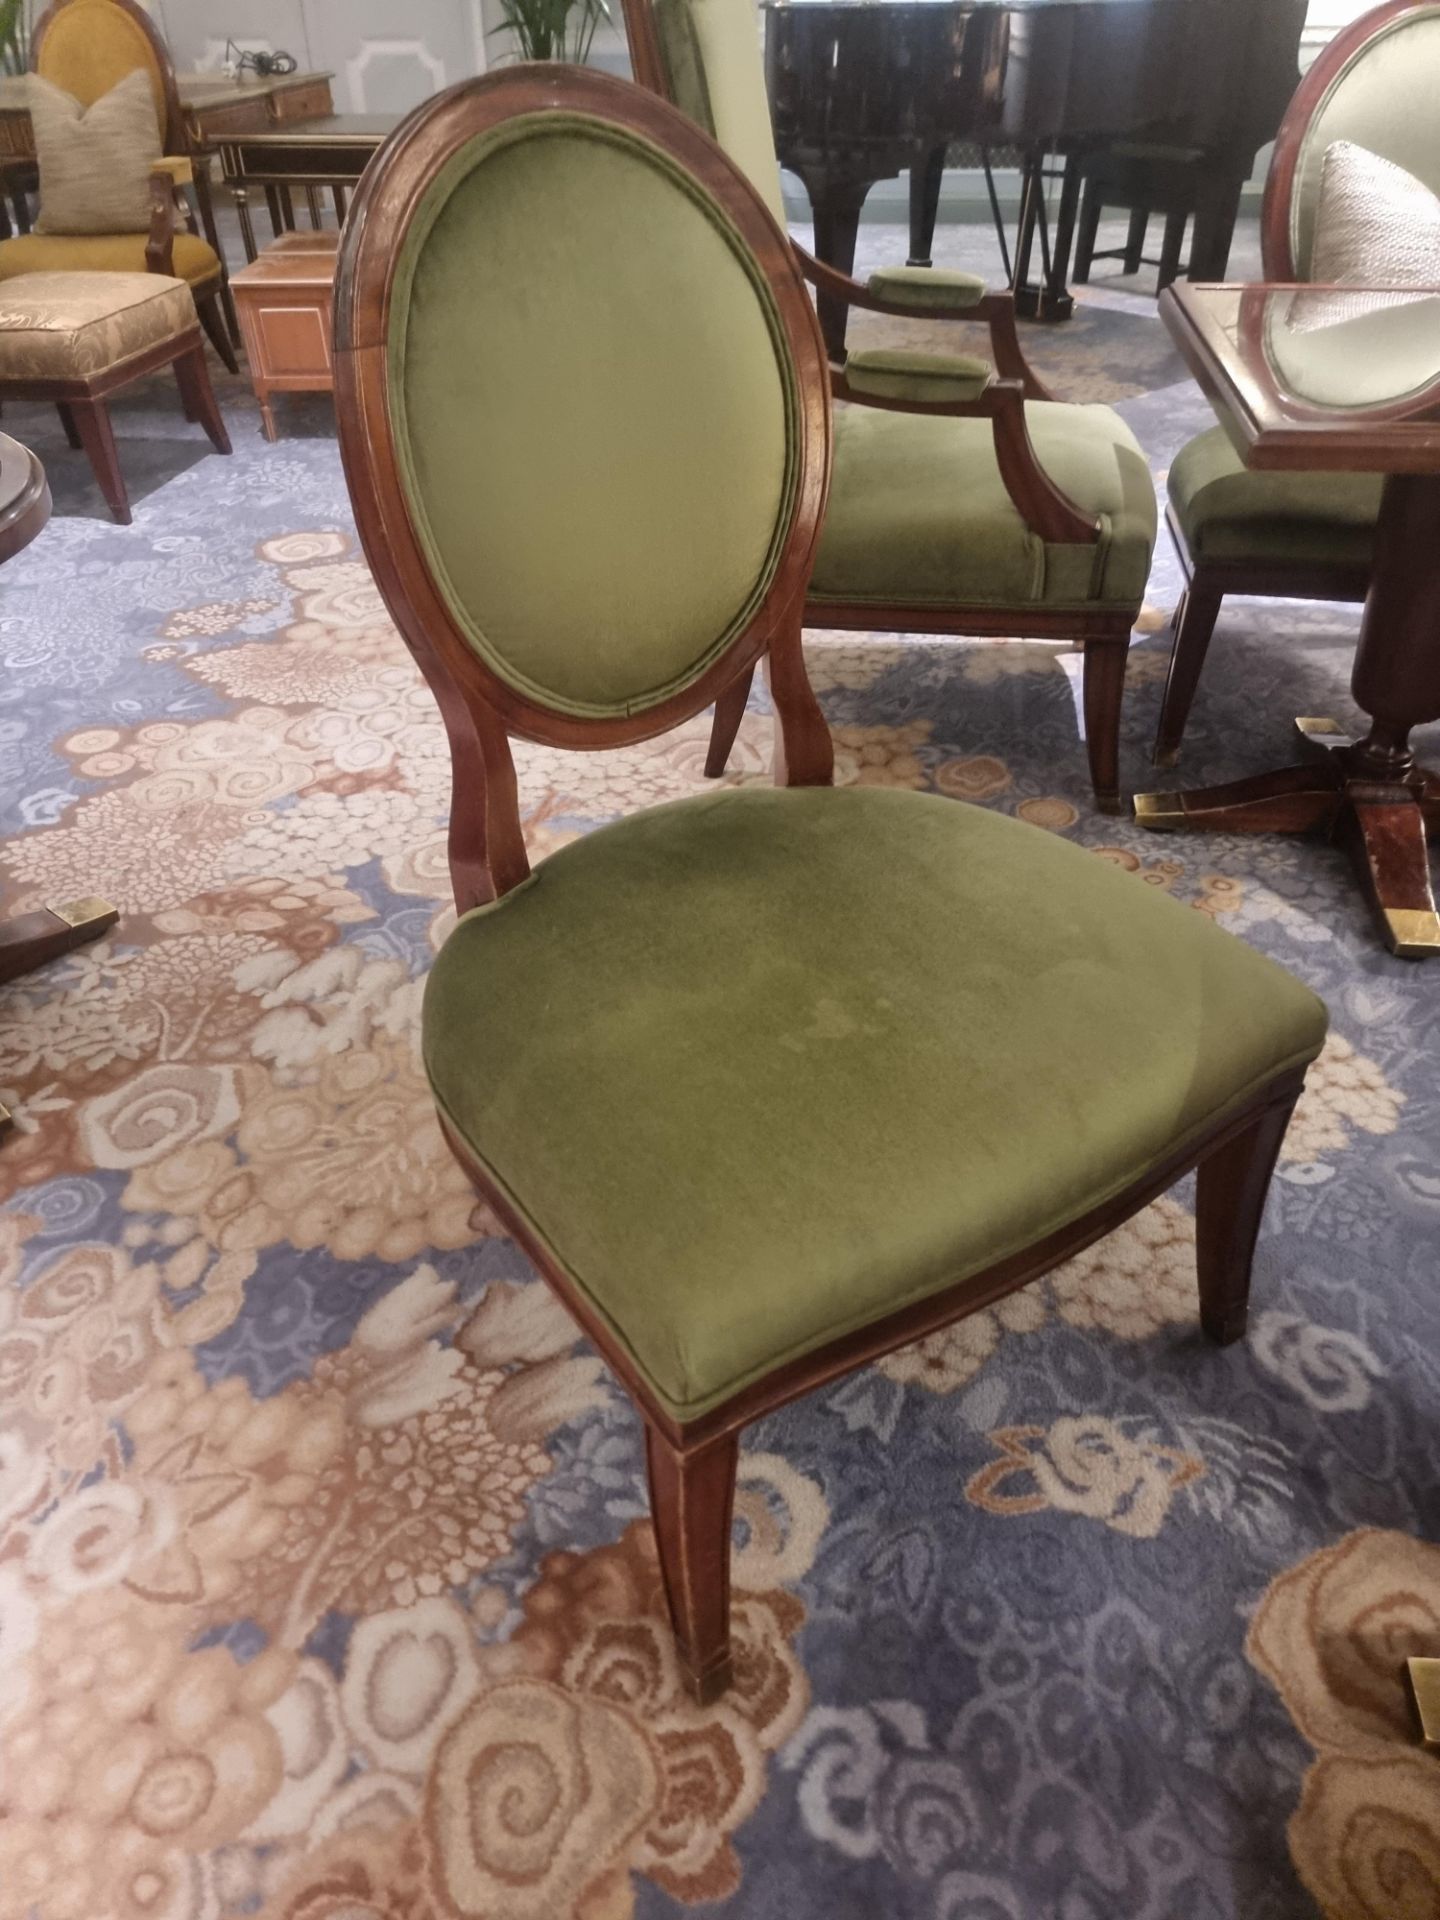 Louis XVI Style Framed And Upholstered Arm Chair In Lelievre Paris Olive Green Salon Chair 68 x 68 x - Bild 3 aus 5